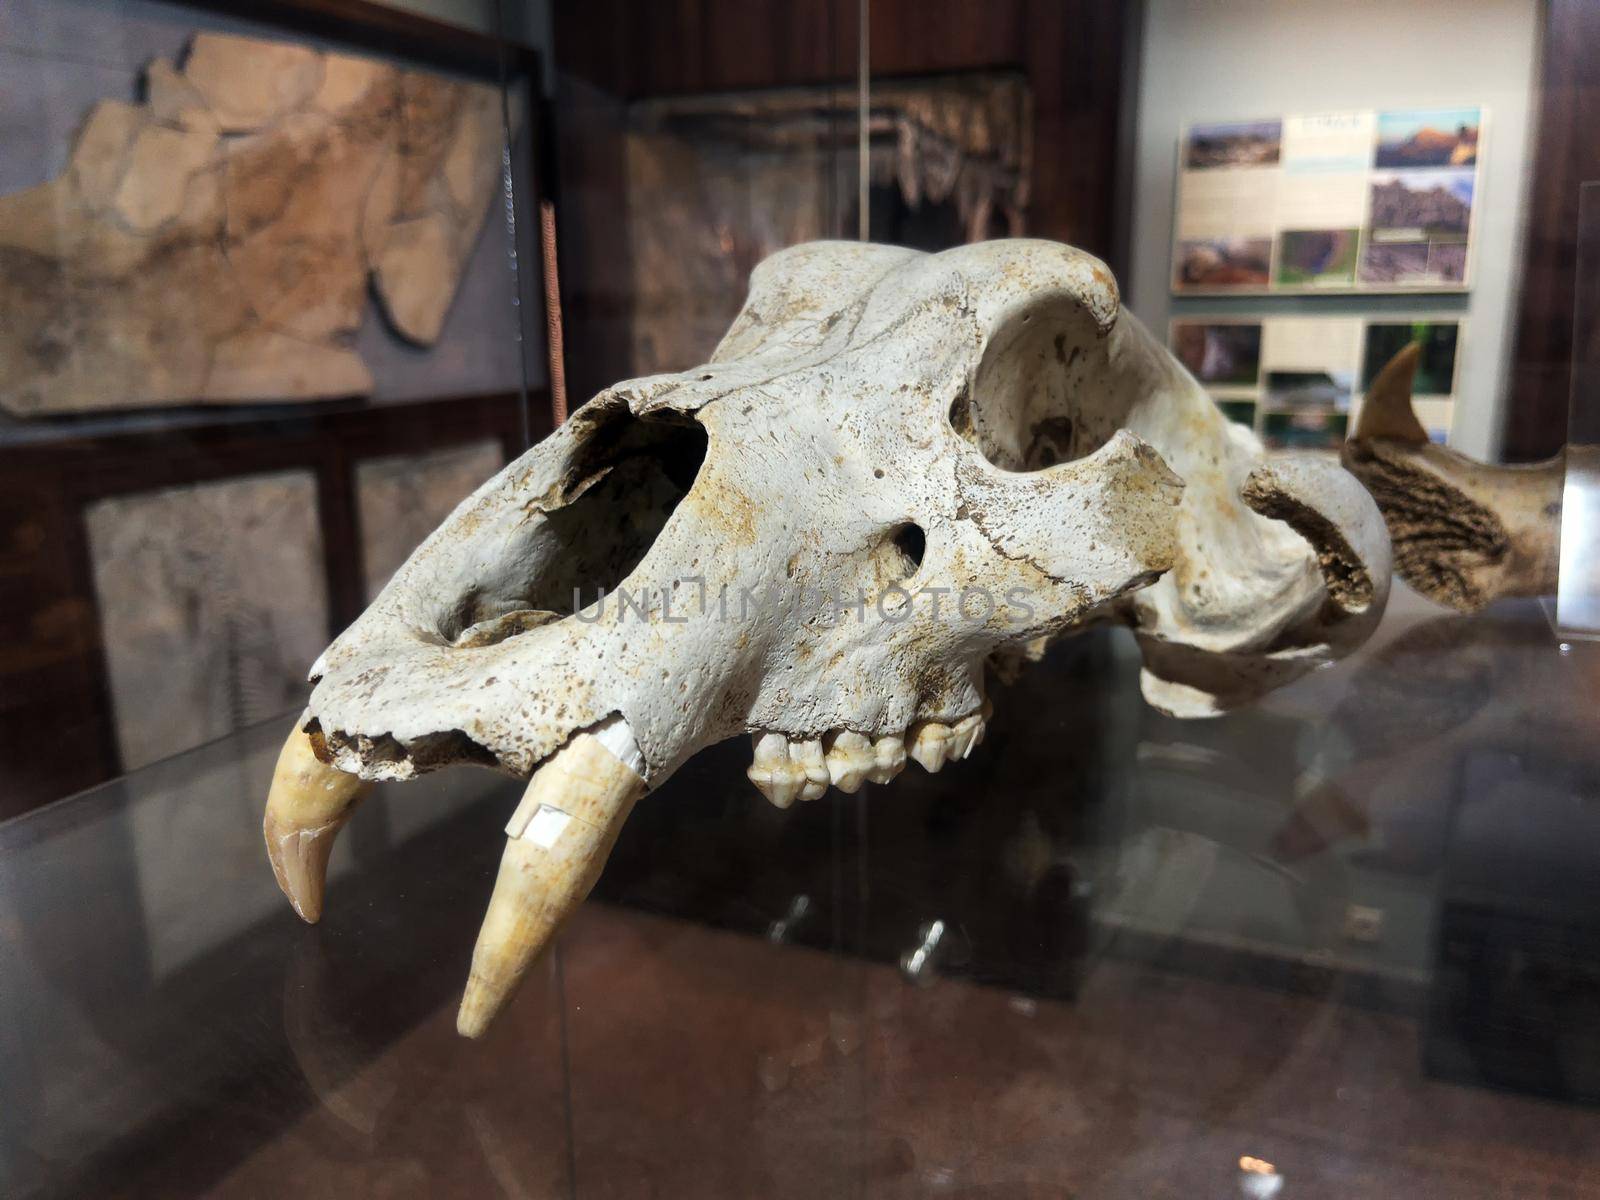 The skull of an ancient predatory animal in the museum on a glass shelf. Historical remains